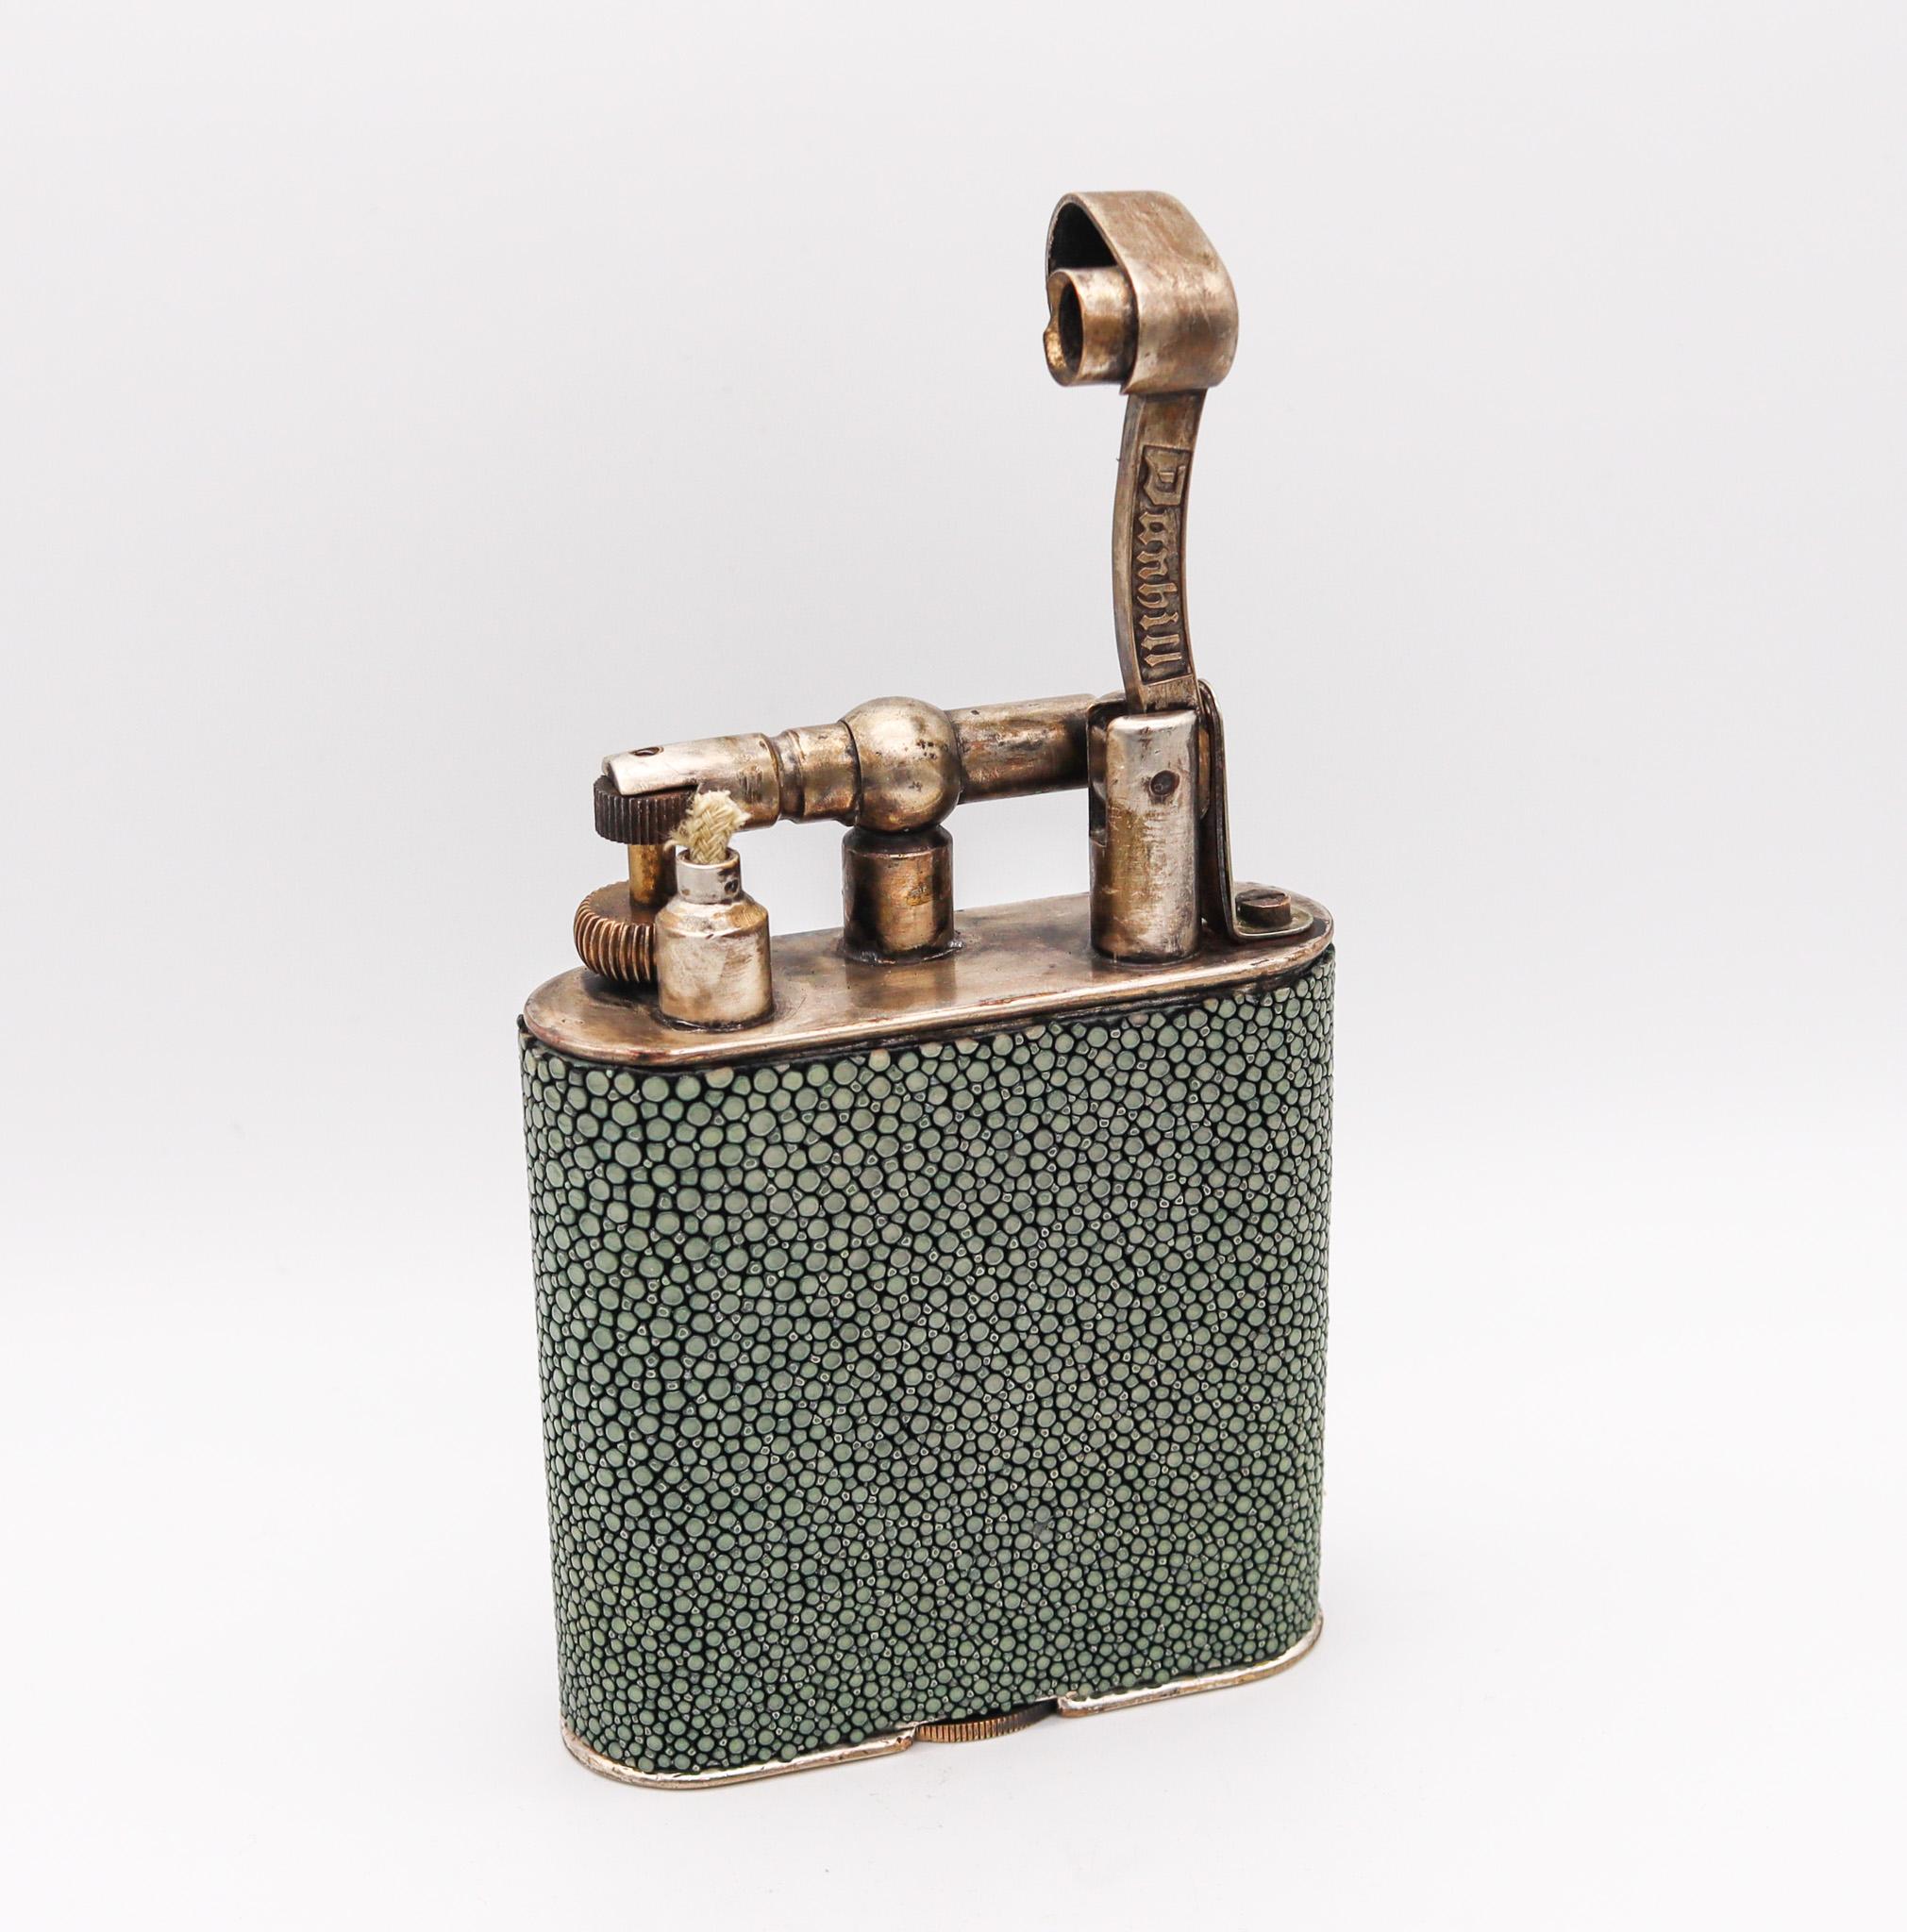 Art Deco Dunhill England 1940 Desk Table Unique Lift Arm Petrol Lighter with Shagreen For Sale